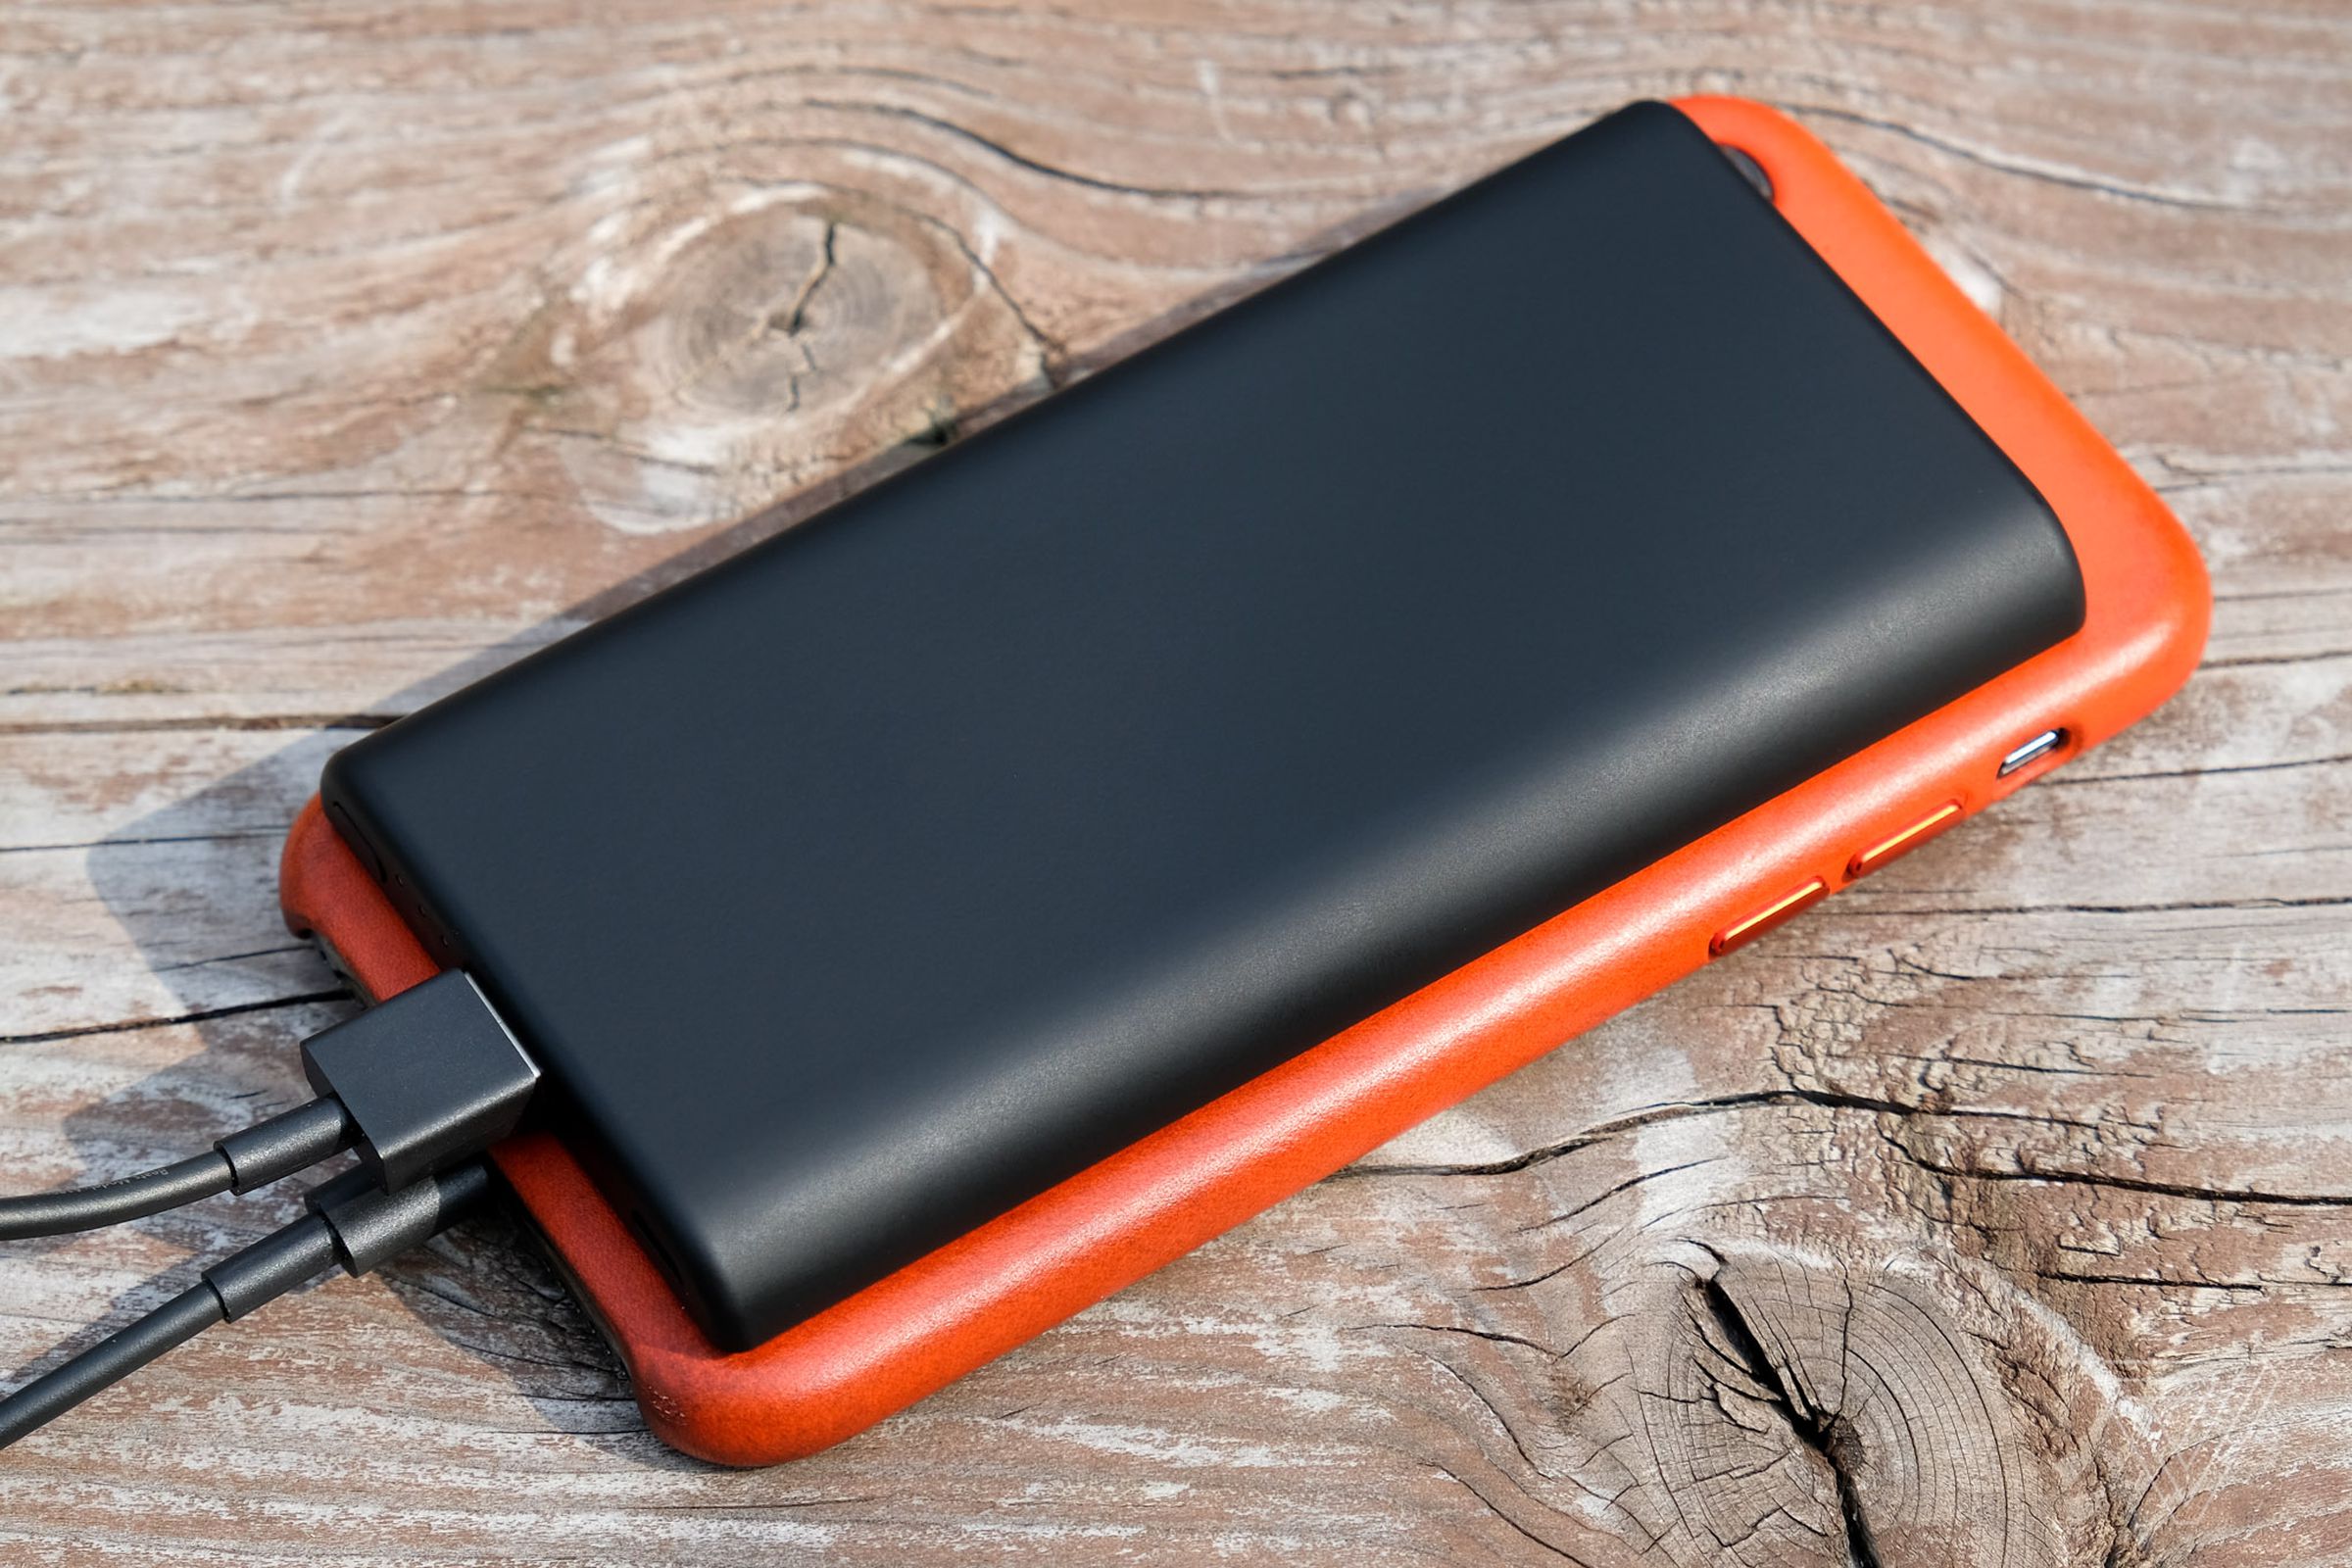 The Anker PowerCore Slim 5000 and an iPhone X.